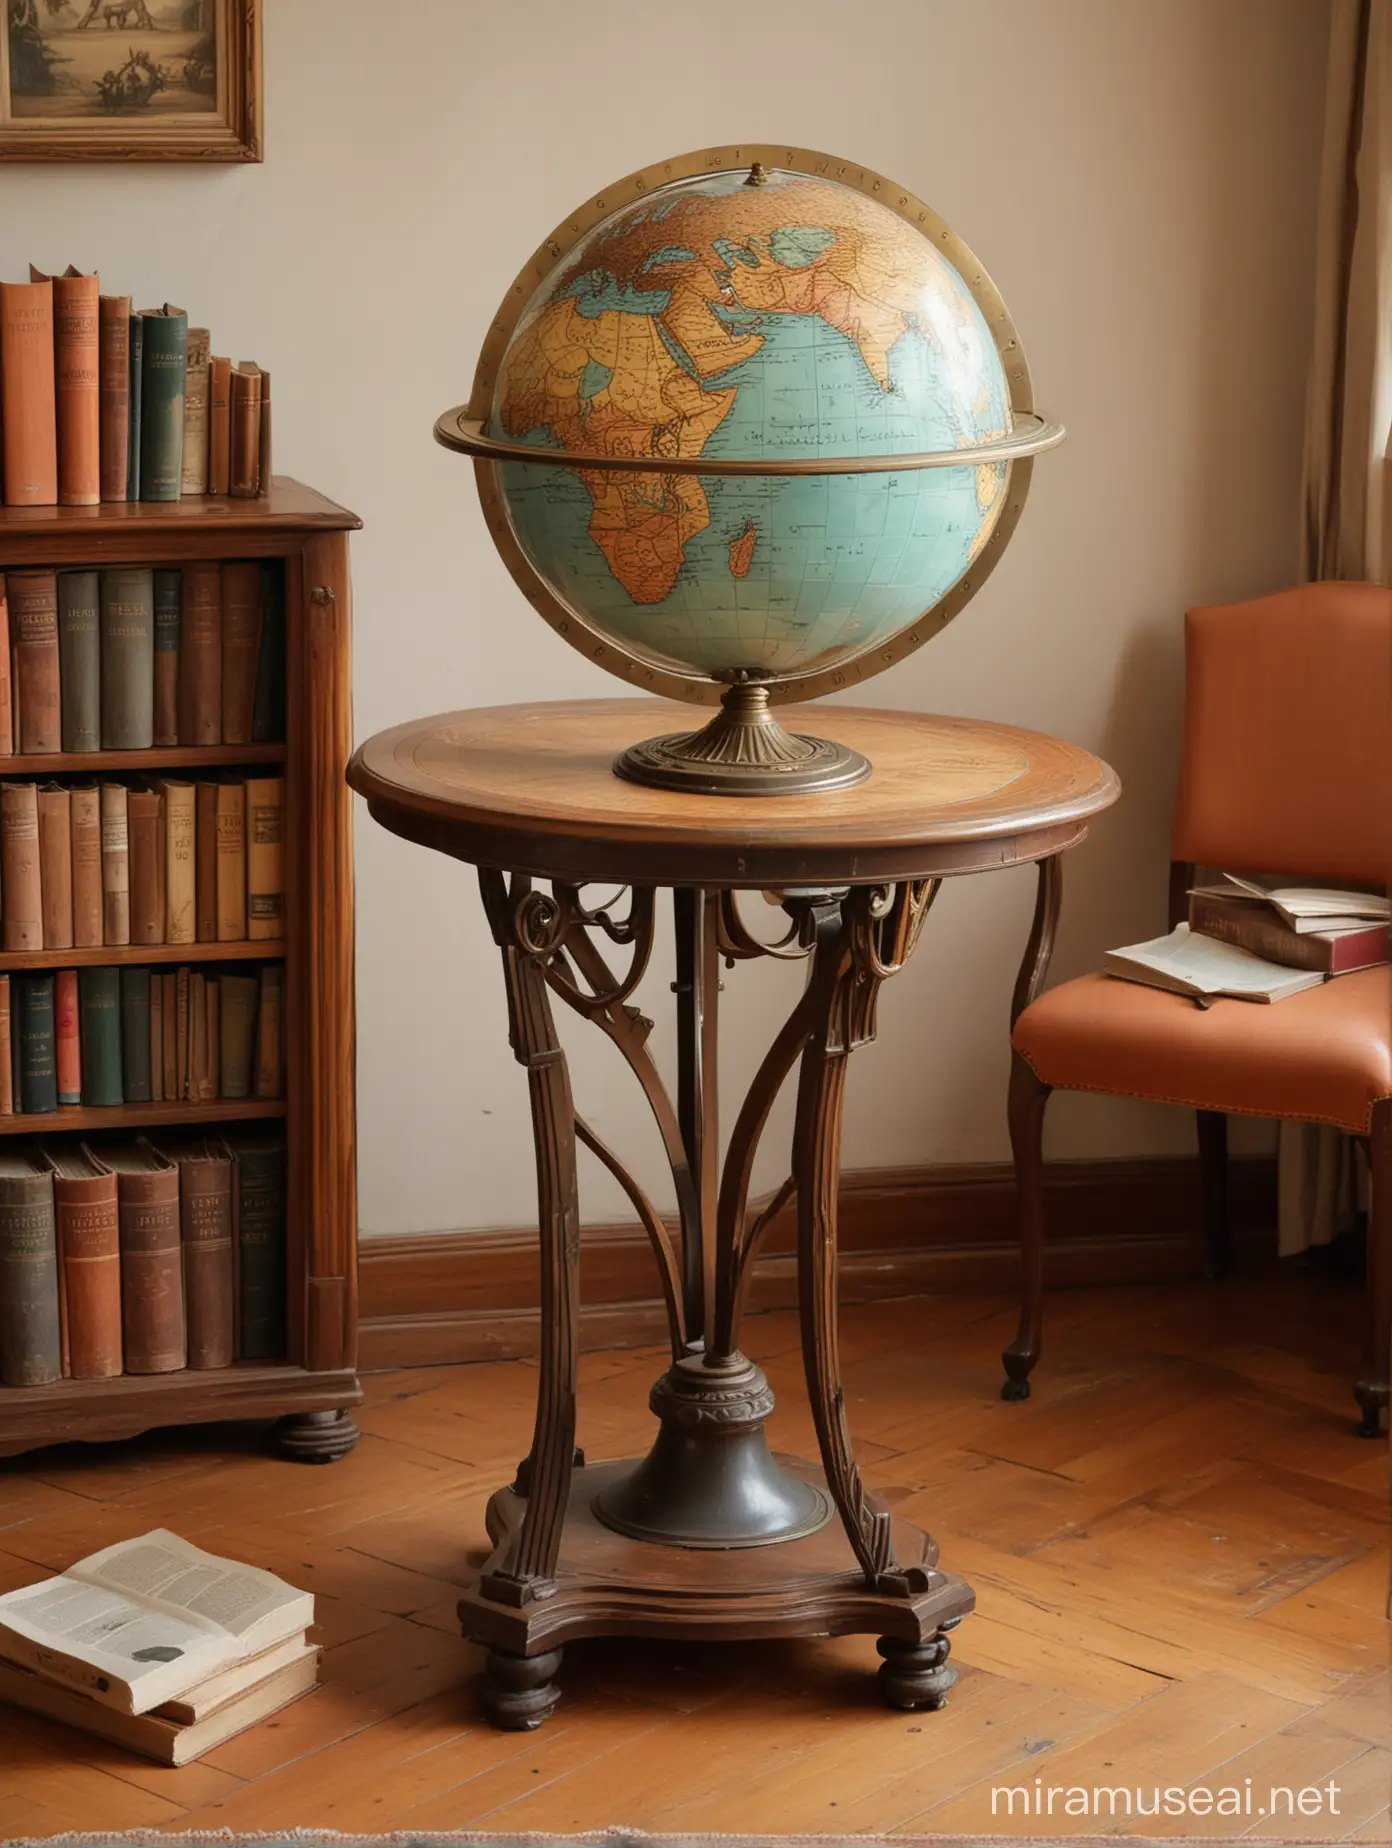 Vintage Study Scene with Terrestrial Globe Clock and Books